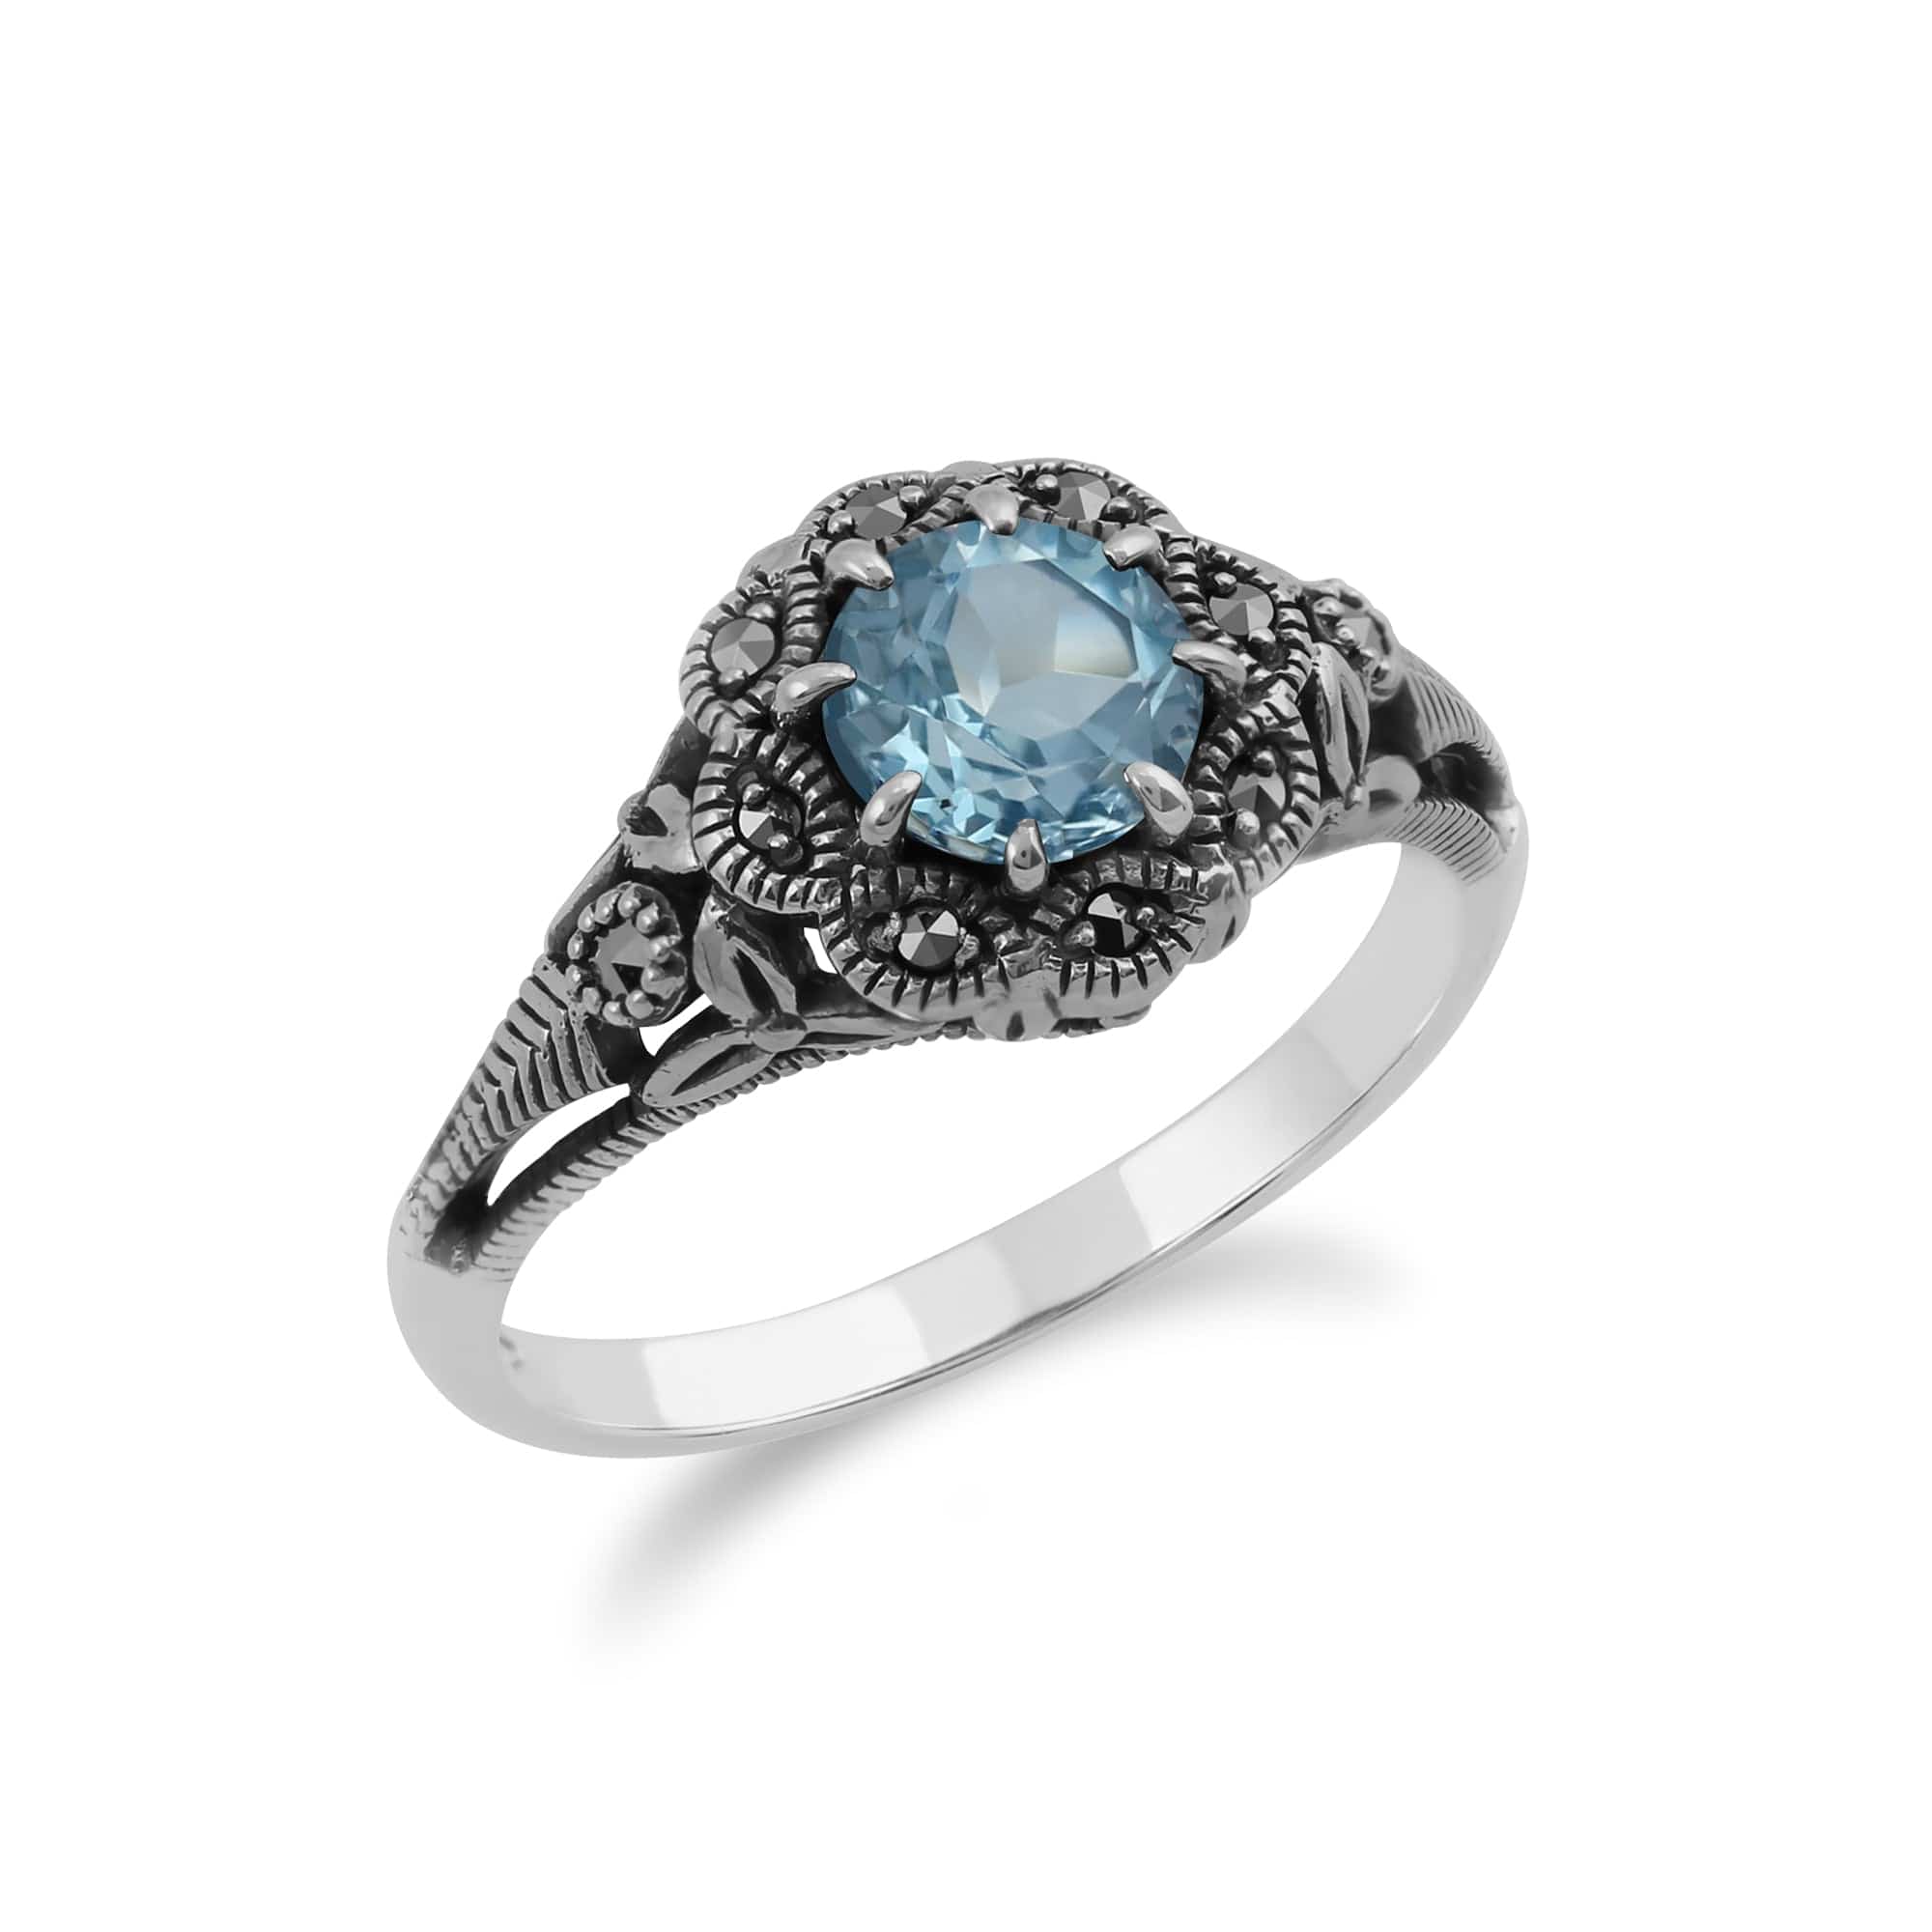 214R524704925 Art Nouveau Style Round Blue Topaz & Marcasite Floral Ring in Sterling Silver 2